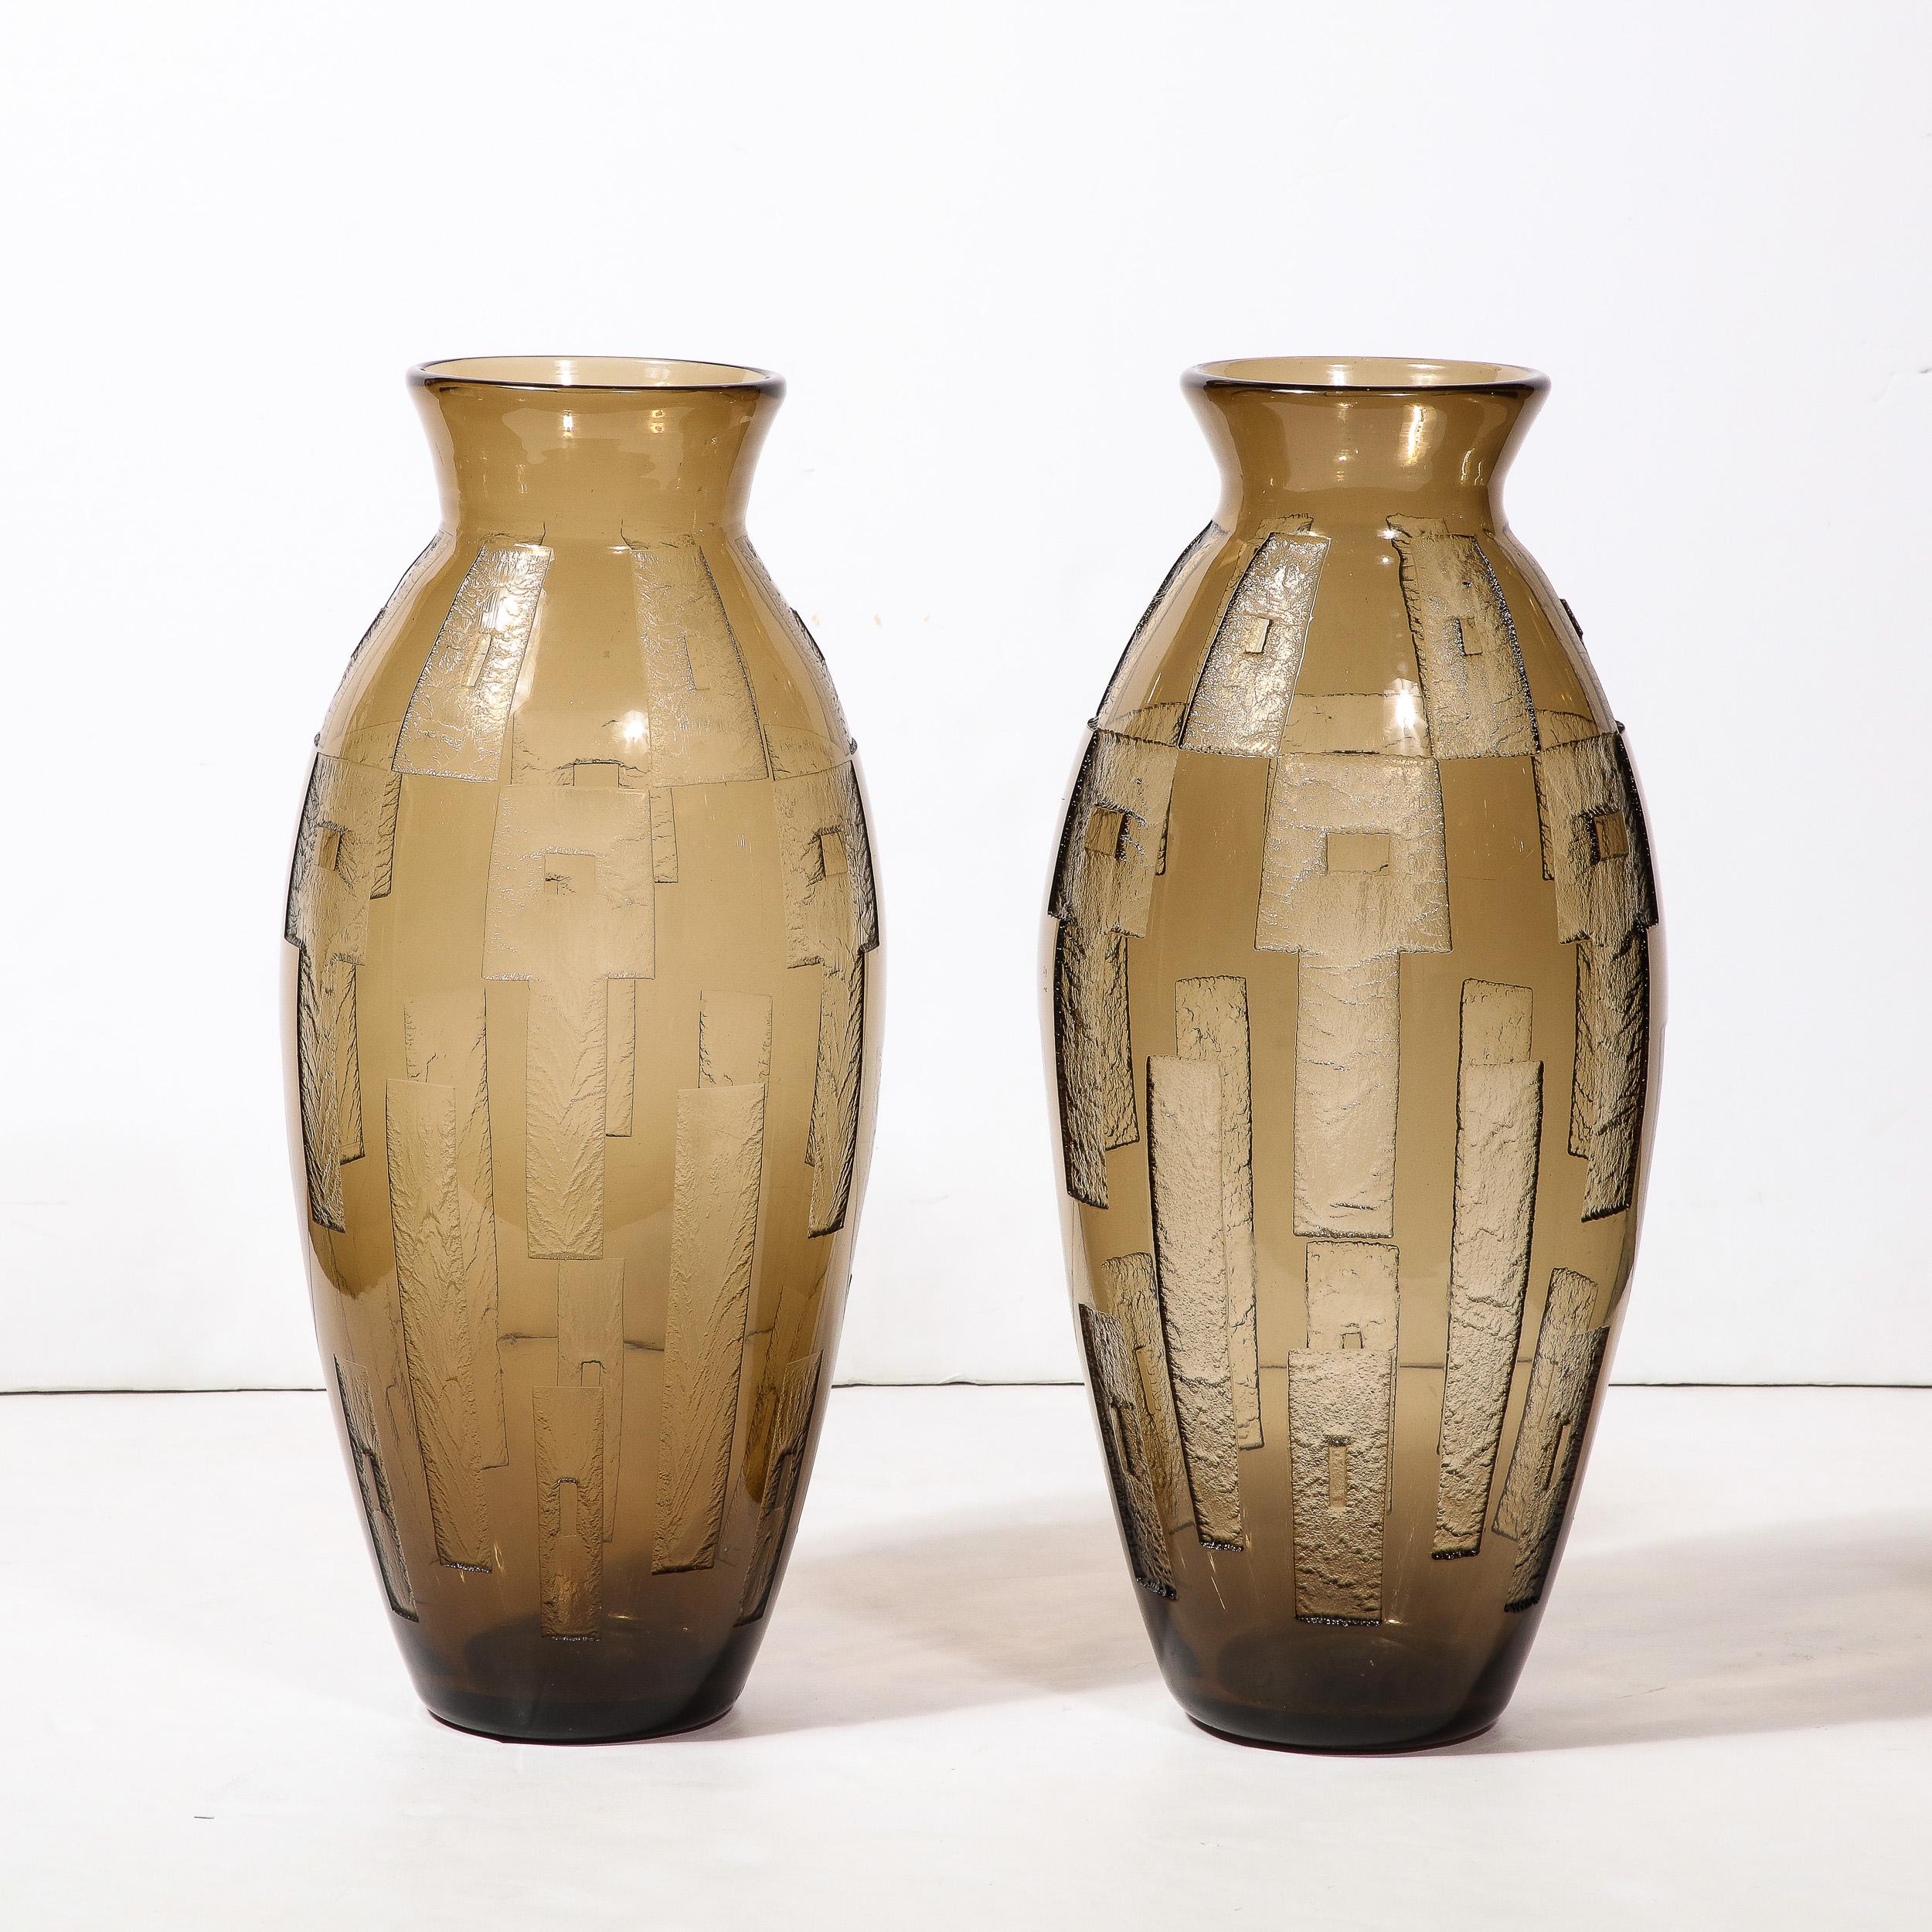 Pair of Art Deco Totem Form Vases in Acid Etched Smoked Geometric Glass by Daum For Sale 13